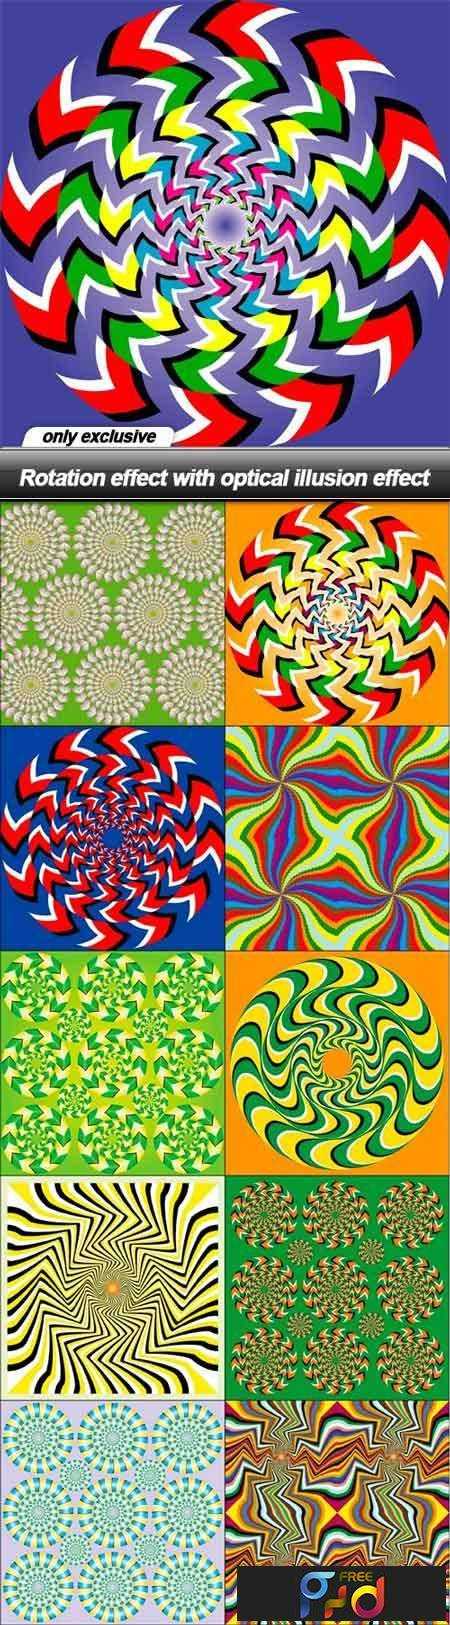 FreePsdVn.com_VECTOR_1701139_rotation_effect_with_optical_illusion_effect_11_eps